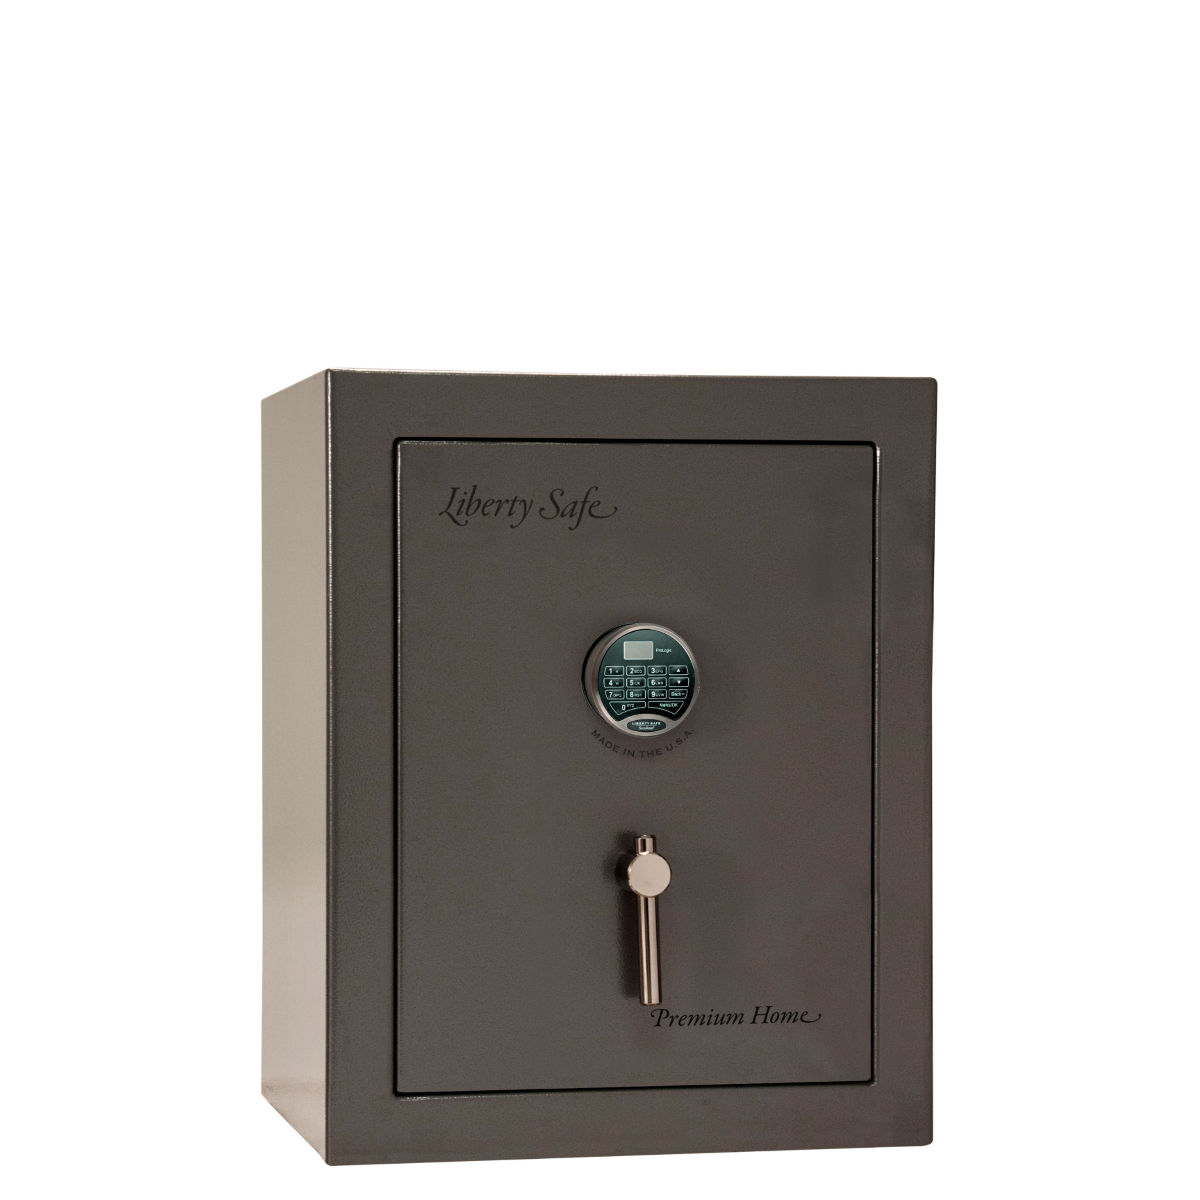 Premium Home Series | Level 7 Security | 2 Hour Fire Protection | 08 | Dimensions: 30"(H) x 24"(W) x 20.25"(D) | Gray Marble - Closed Door